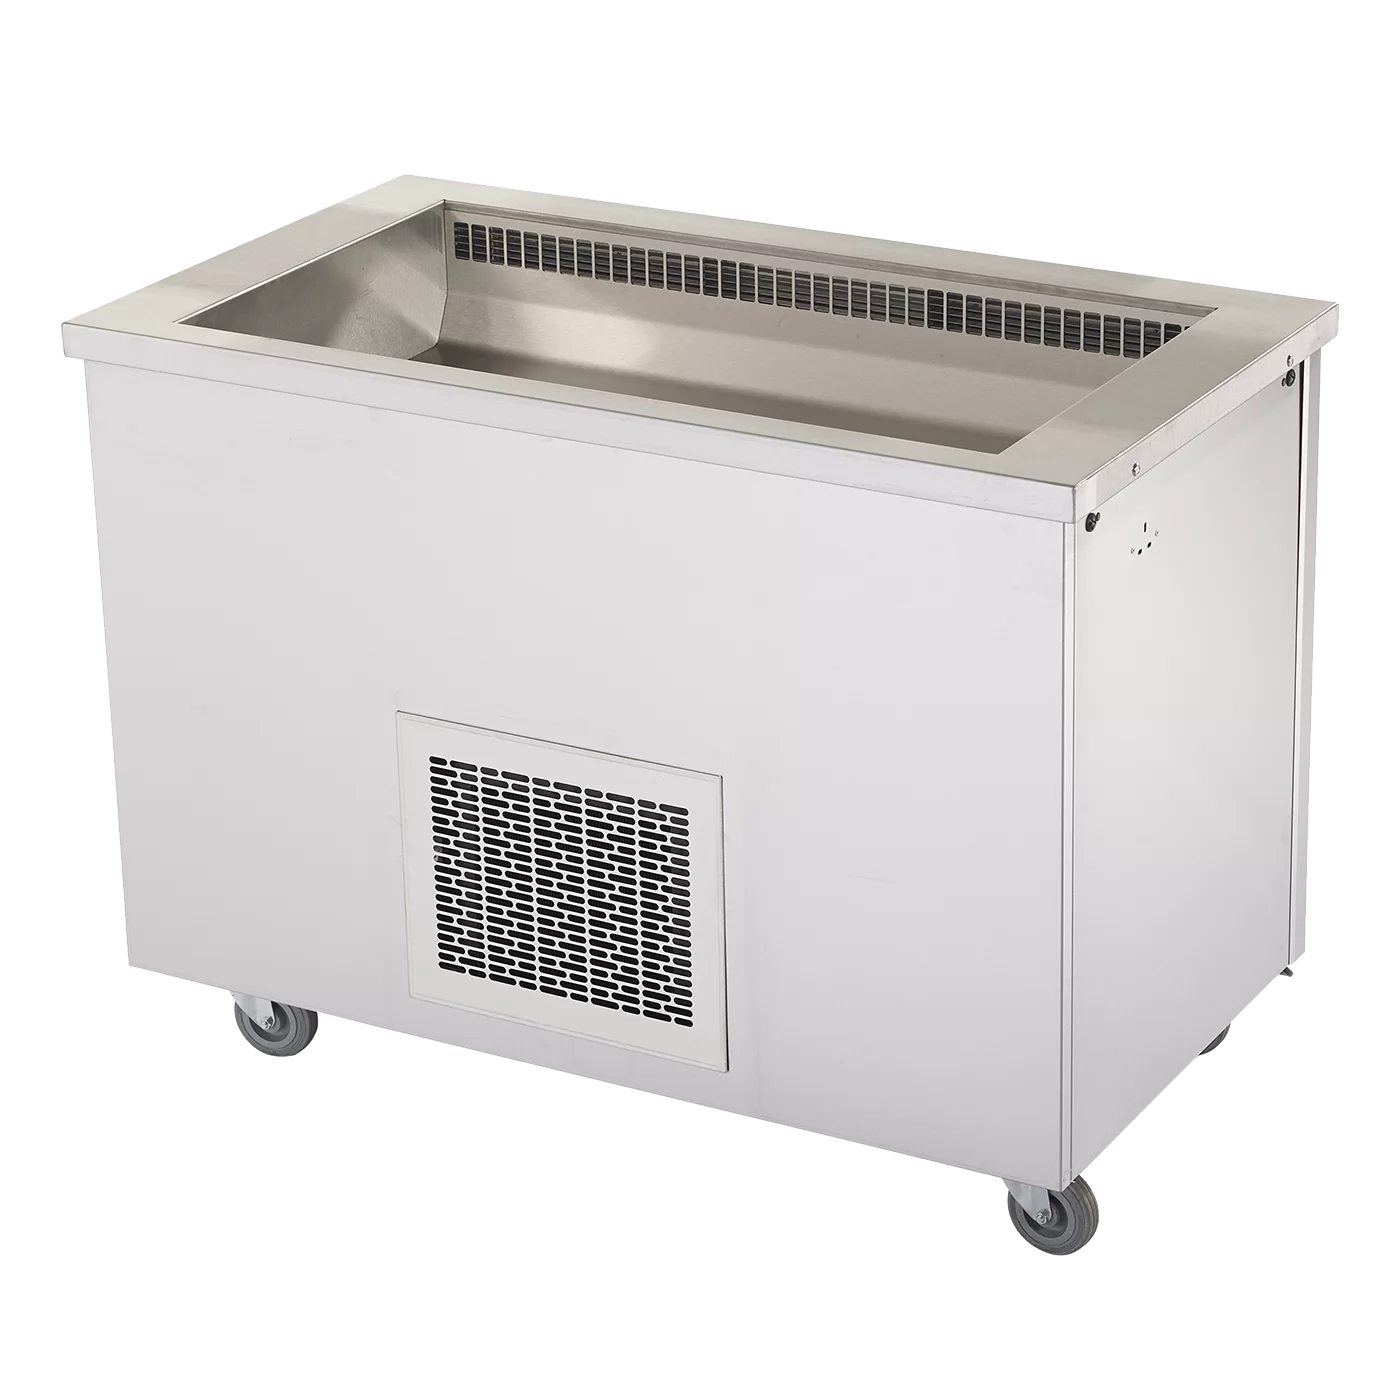 CC874 Victor Refrigerated Blown Air Well RW30MS